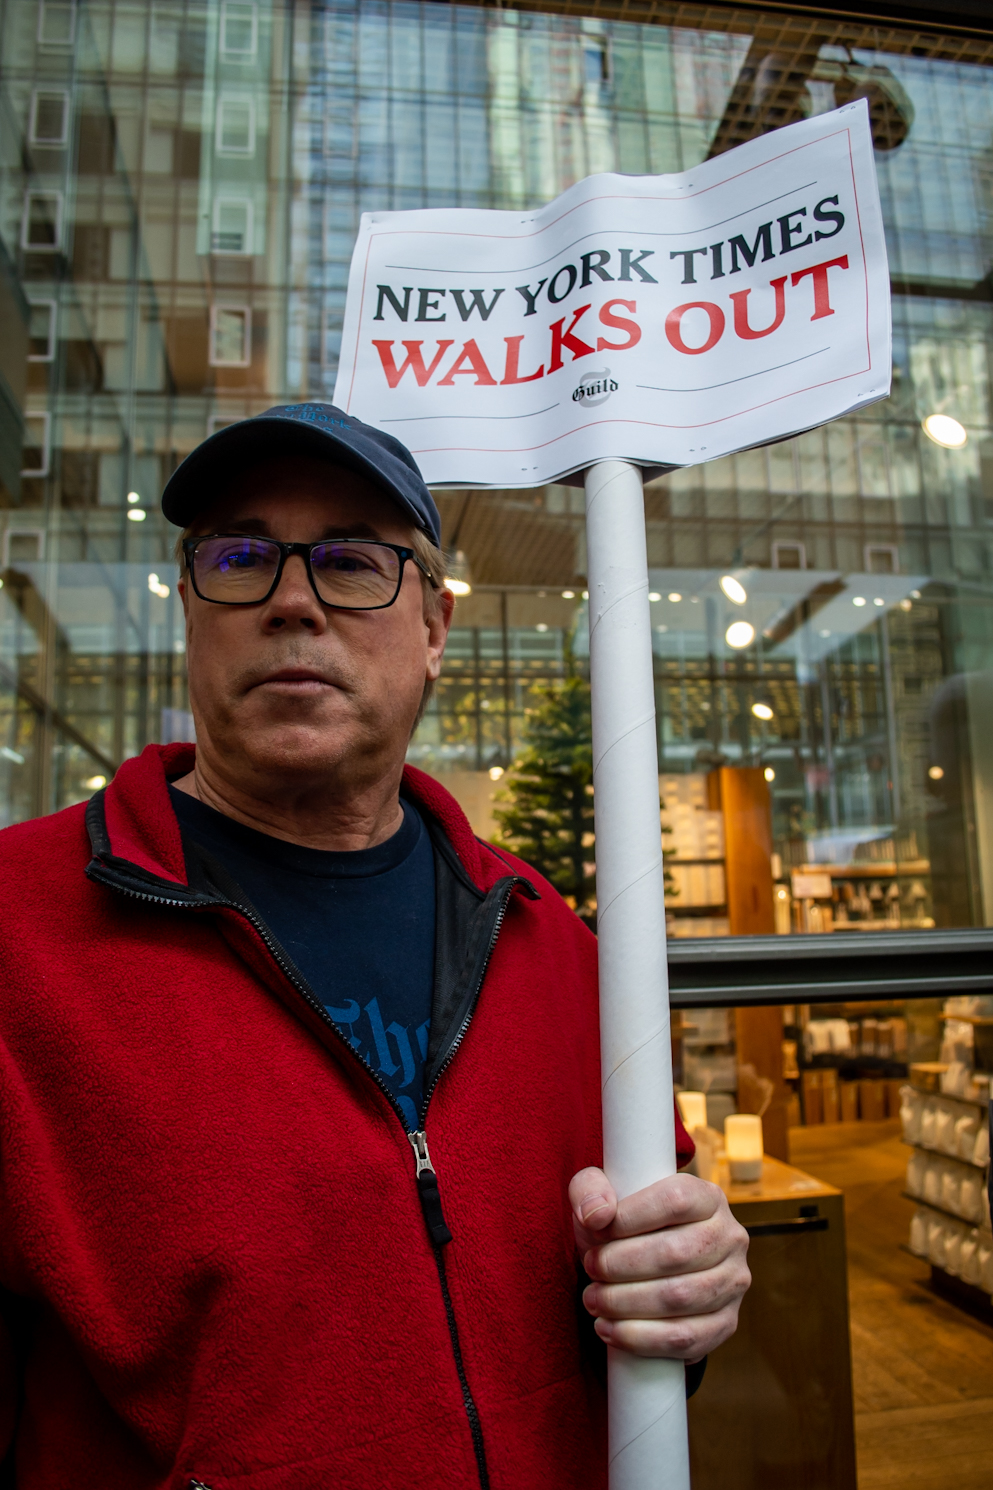 Patrick McGeehan, a man wearing a hat and a red jacket, holds a sign that reads “New York Times Walks Out.”